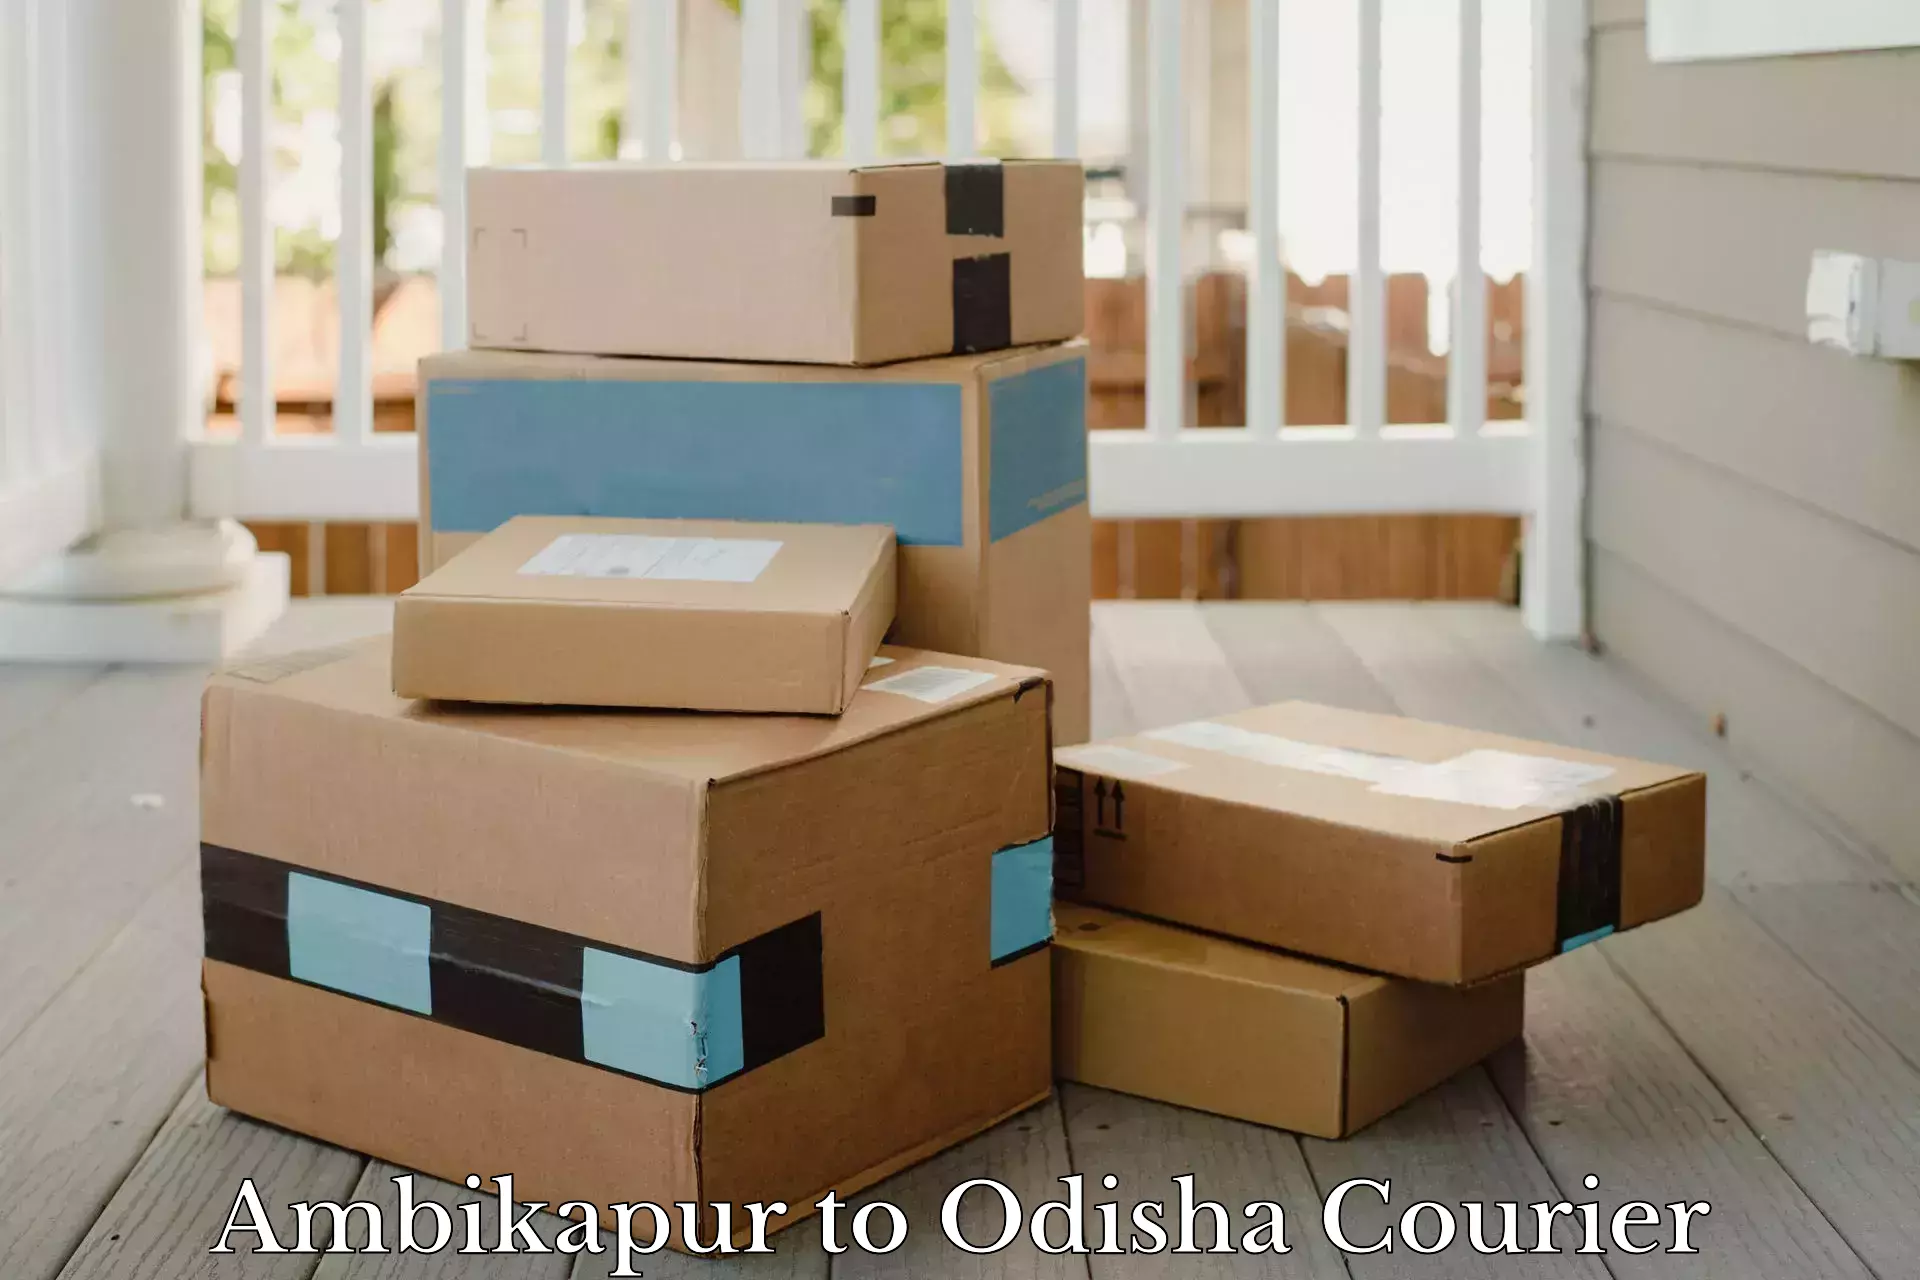 Delivery service partnership Ambikapur to Galleri